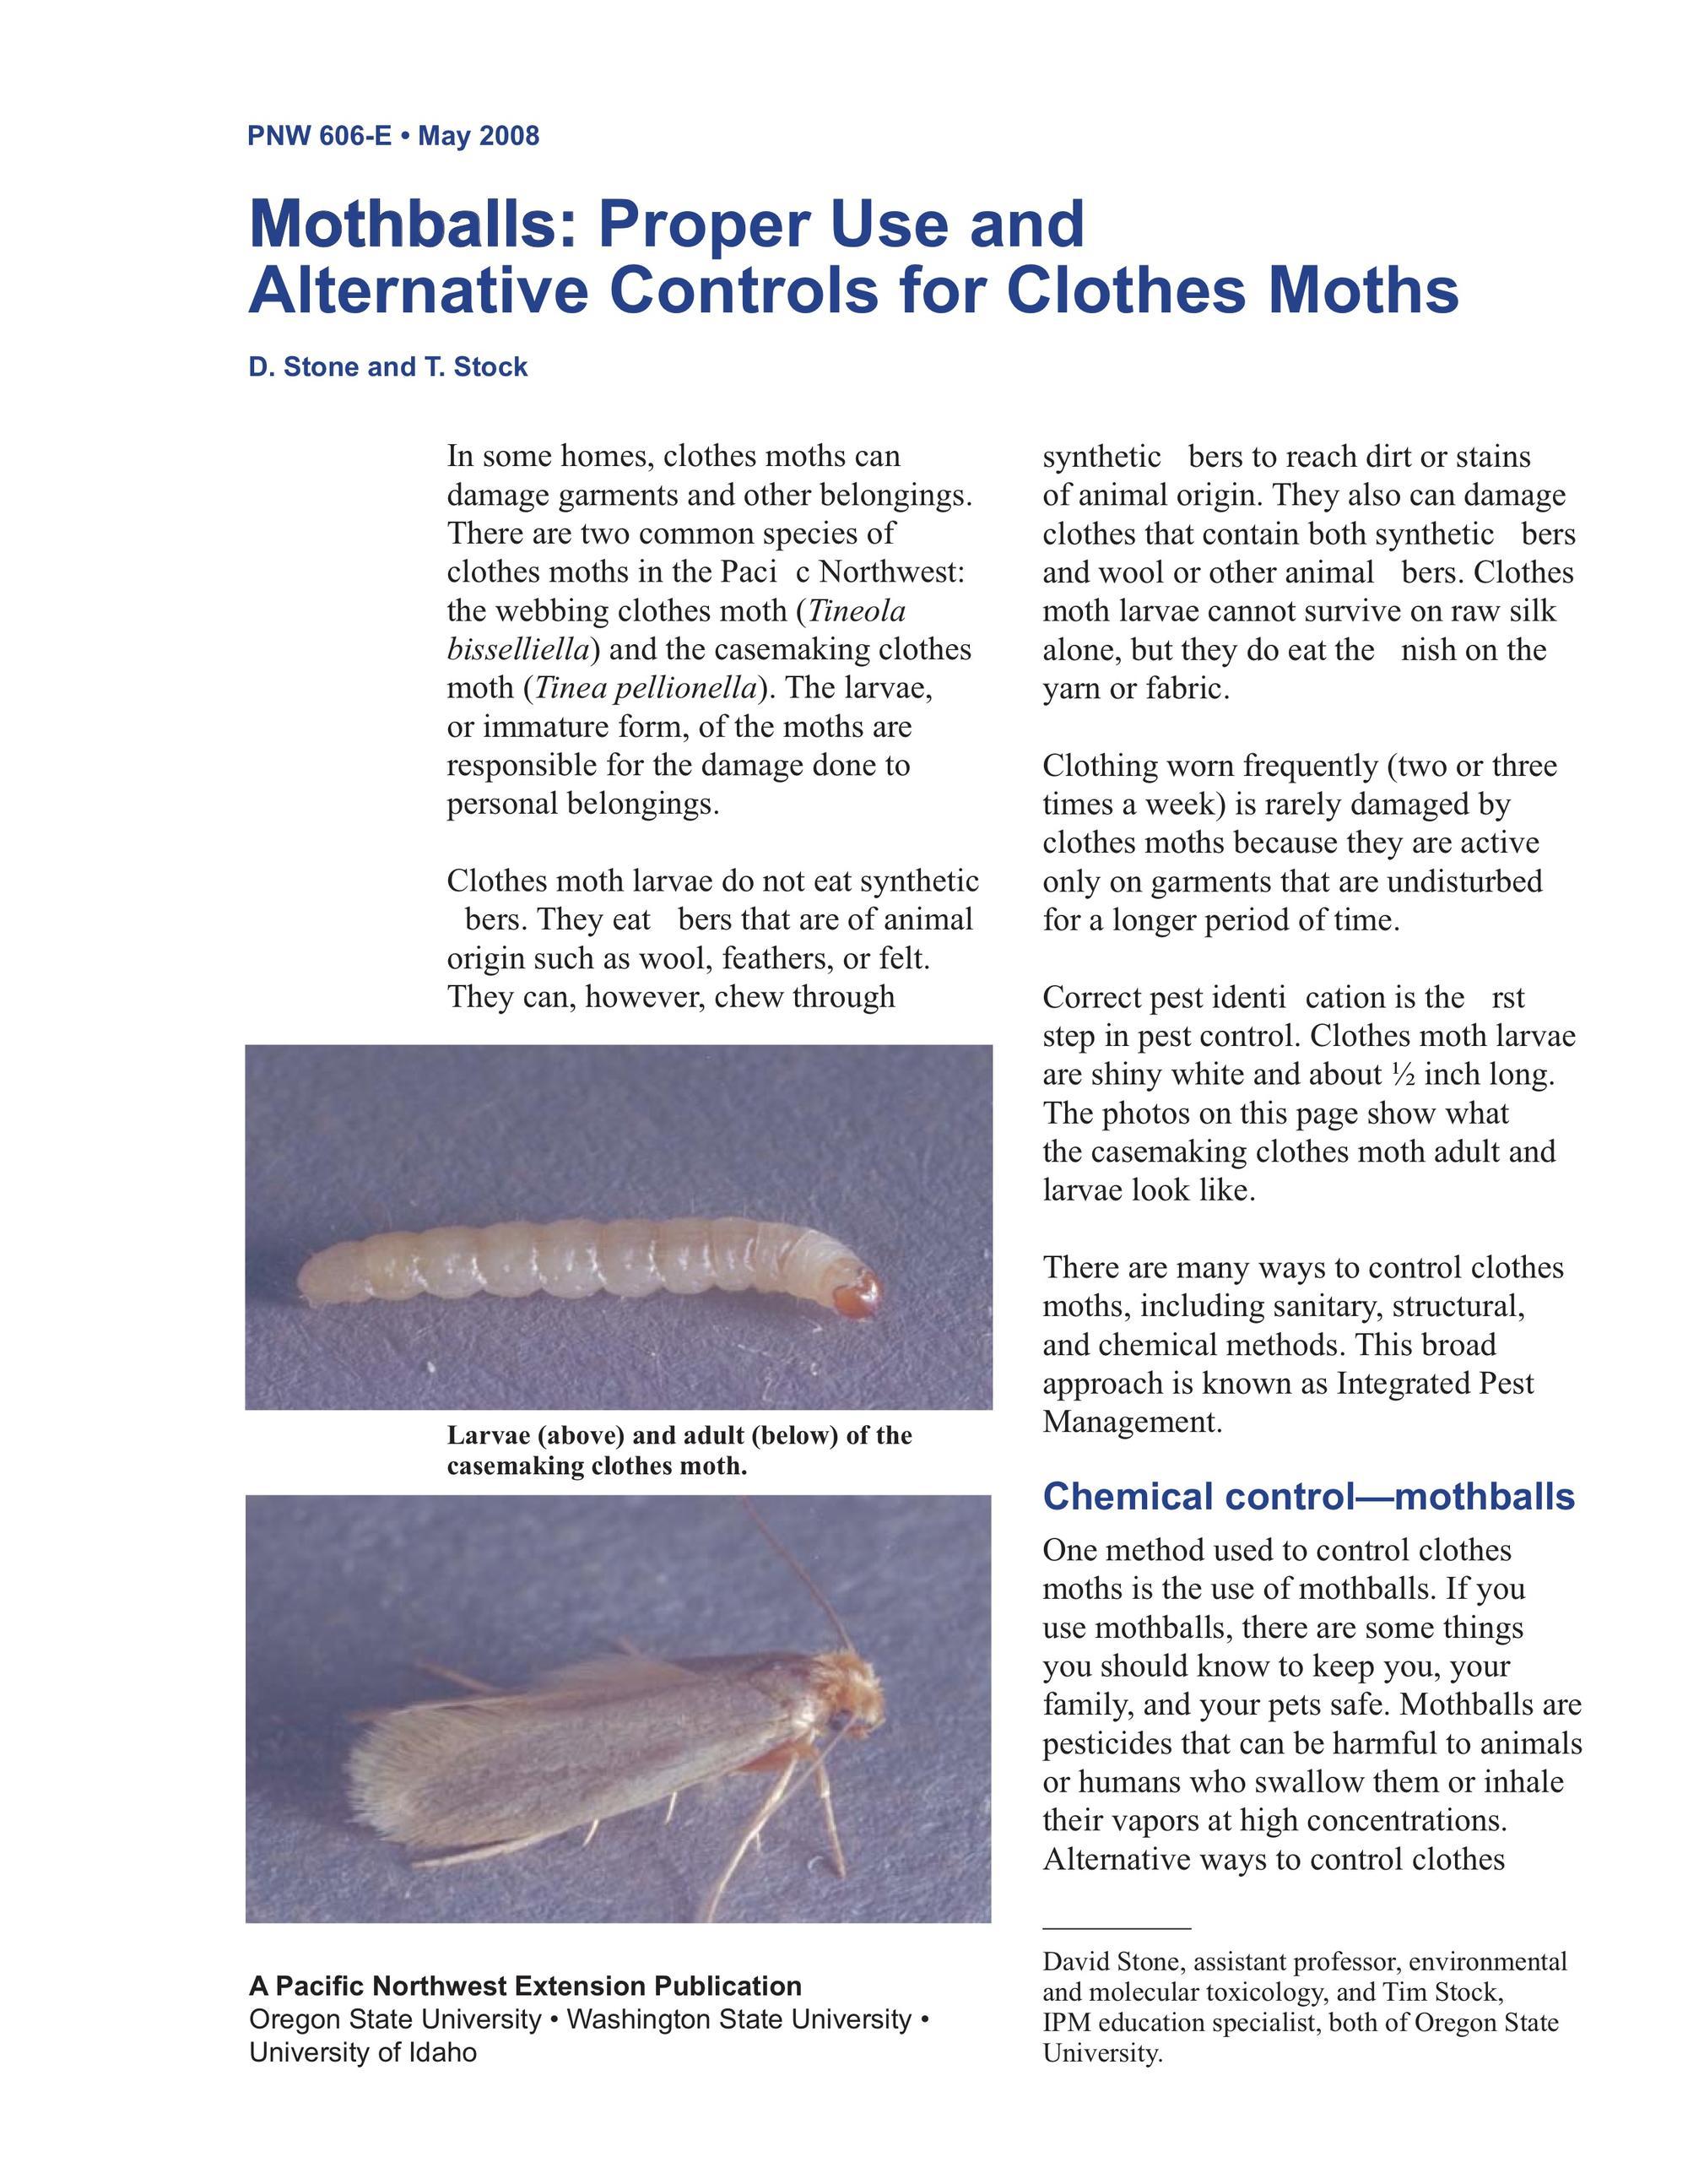 Mothballs: A Short History & Guide For Use